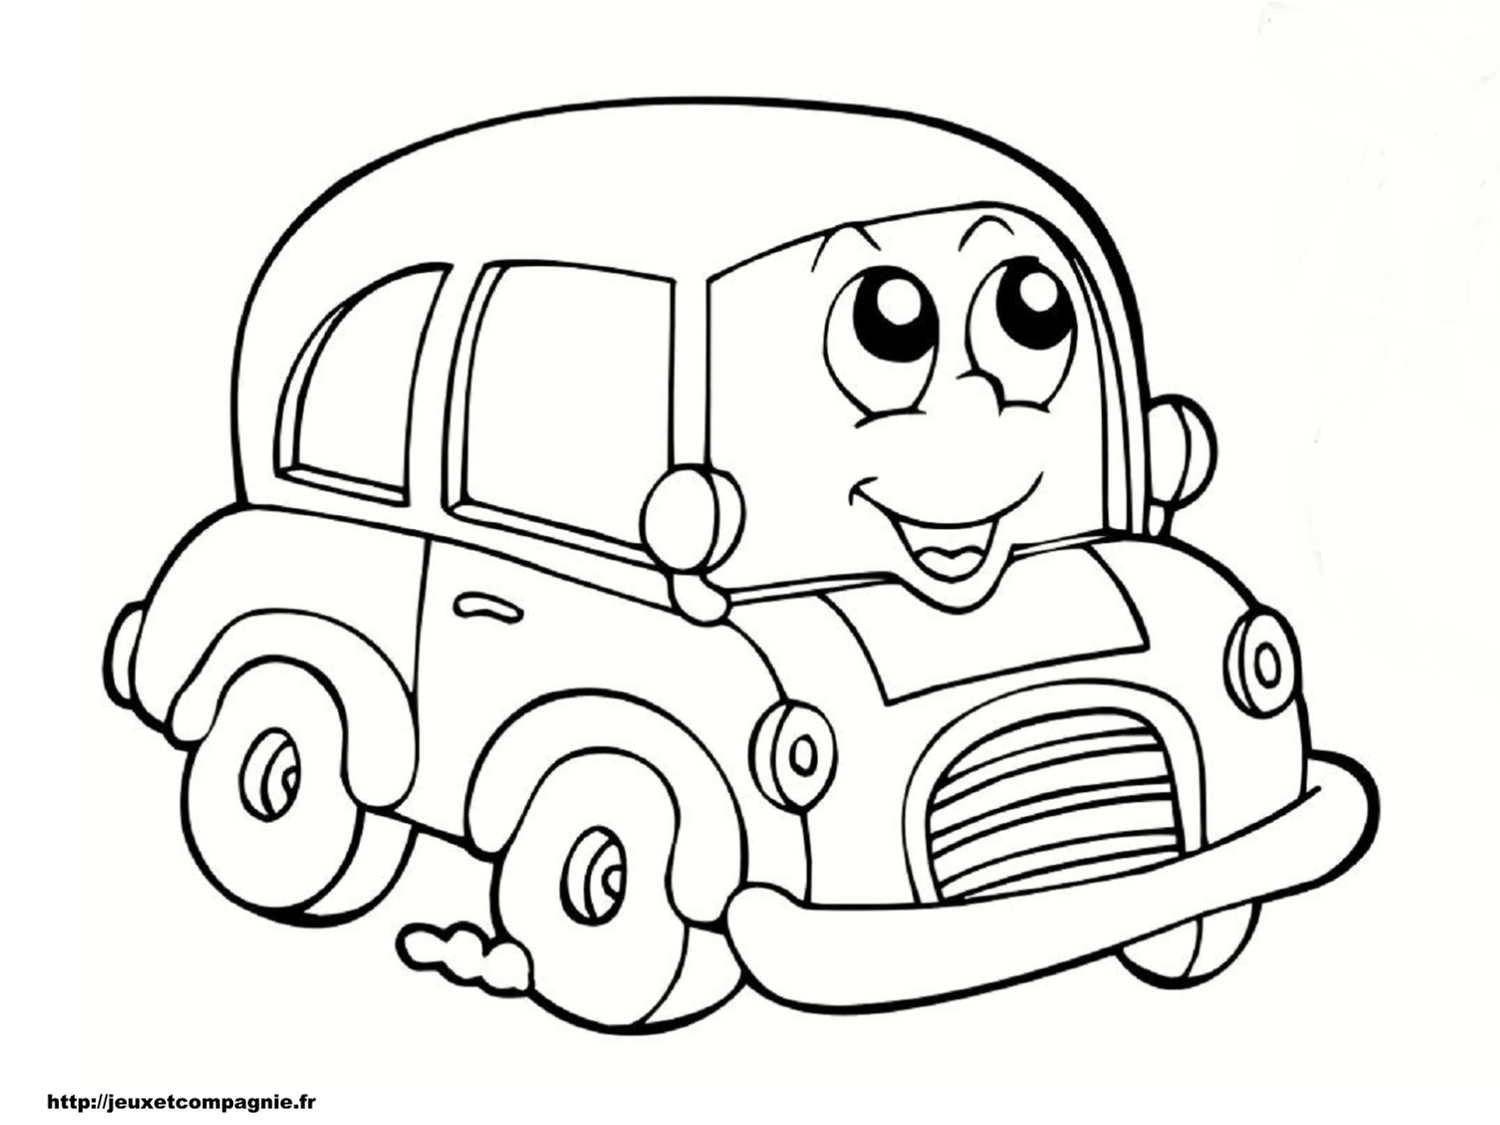 Download Car to color for children - Car Kids Coloring Pages